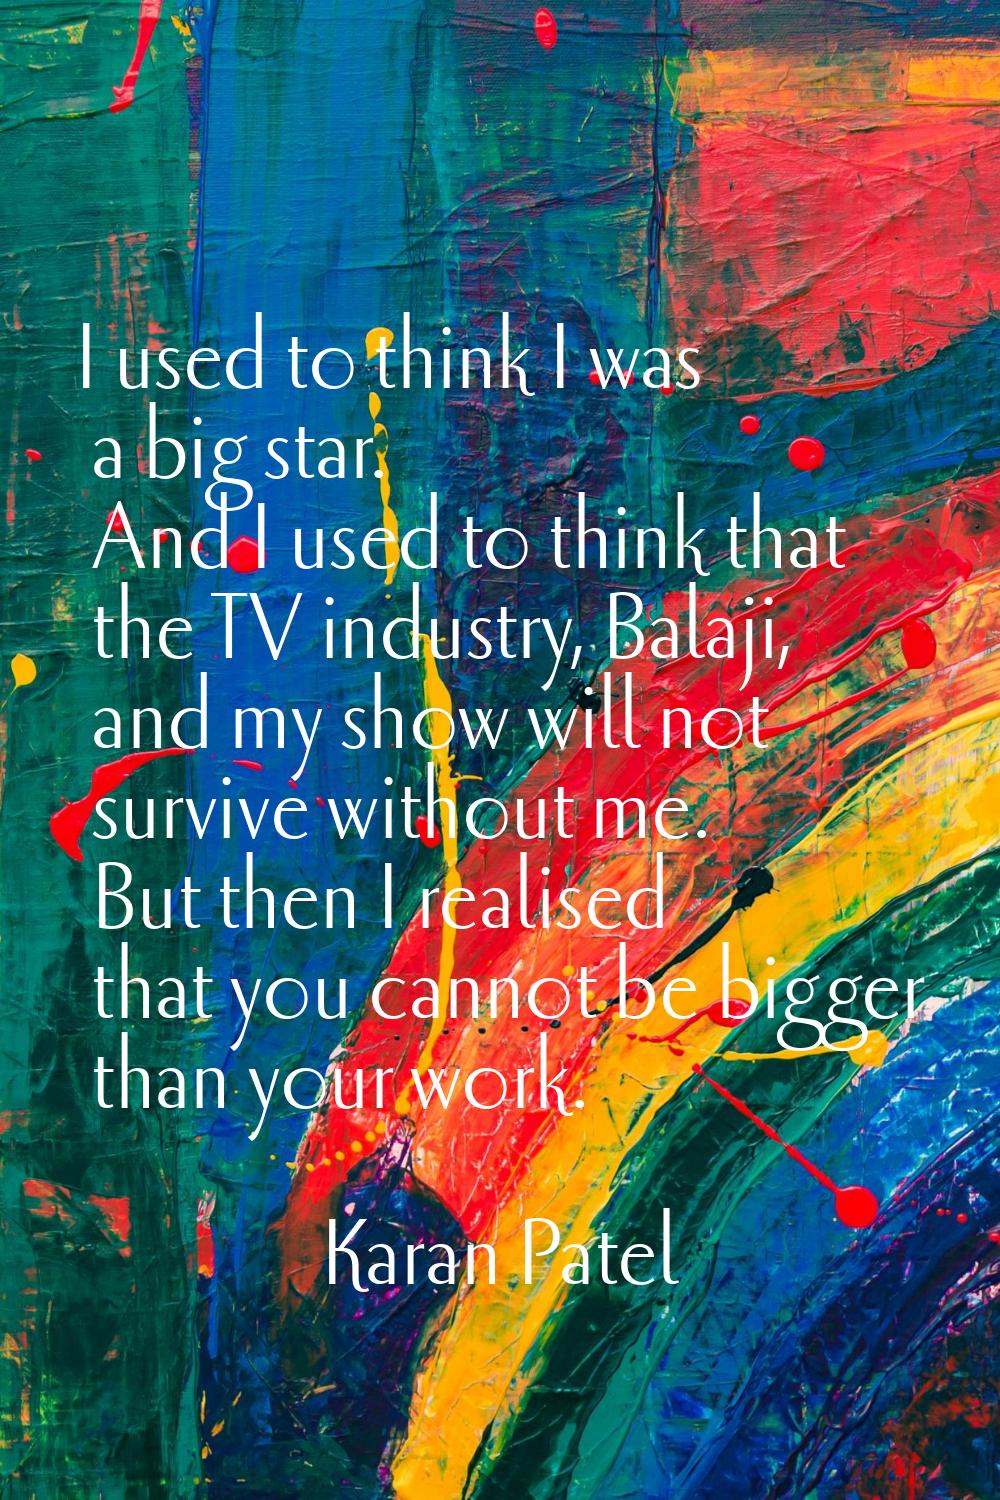 I used to think I was a big star. And I used to think that the TV industry, Balaji, and my show wil